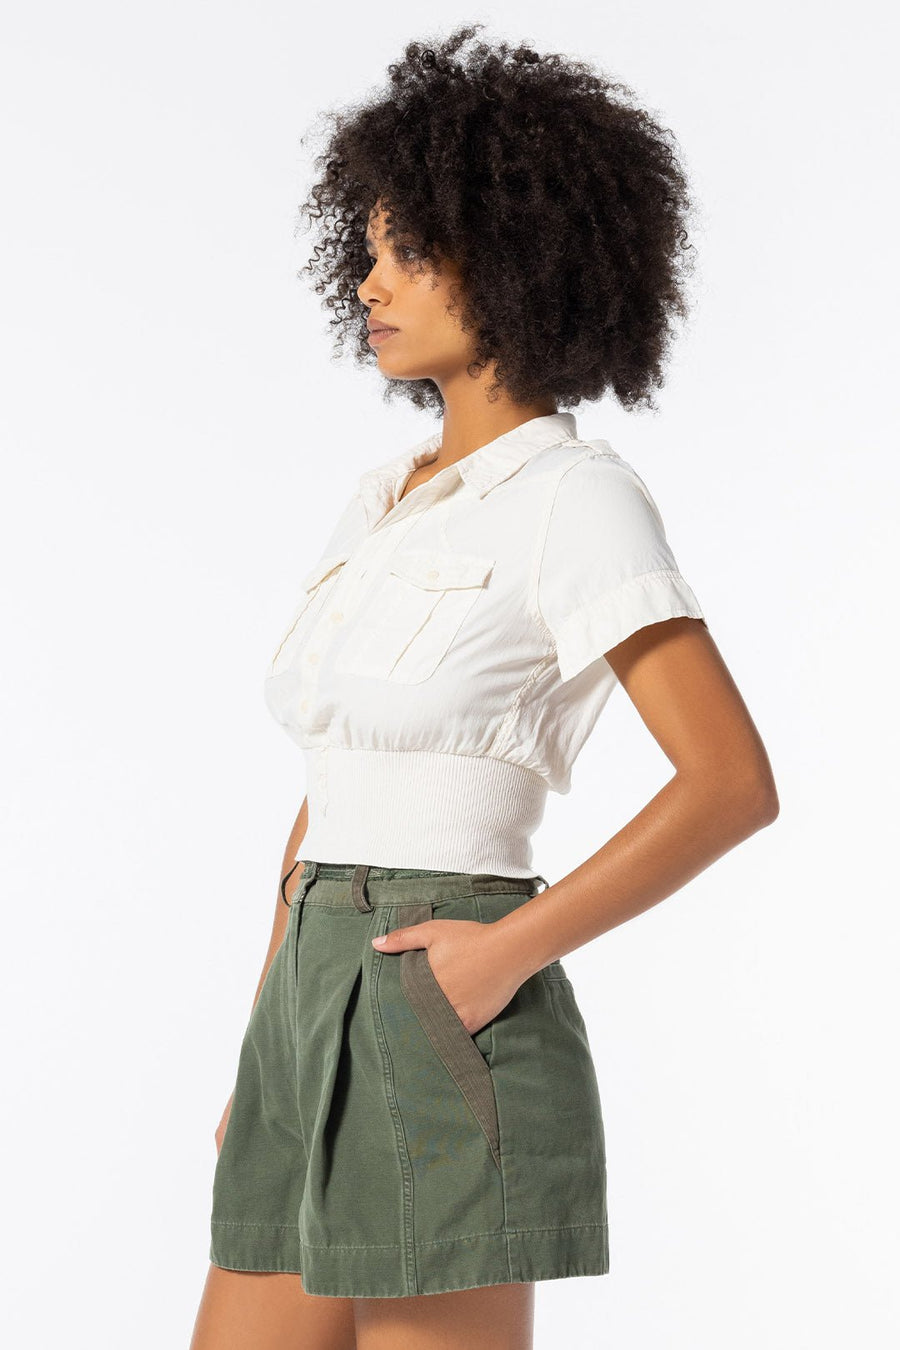 SERENGETI SHORT SLEEVE BUTTON DOWN TOP, NATURAL - Burning Torch Online Boutique